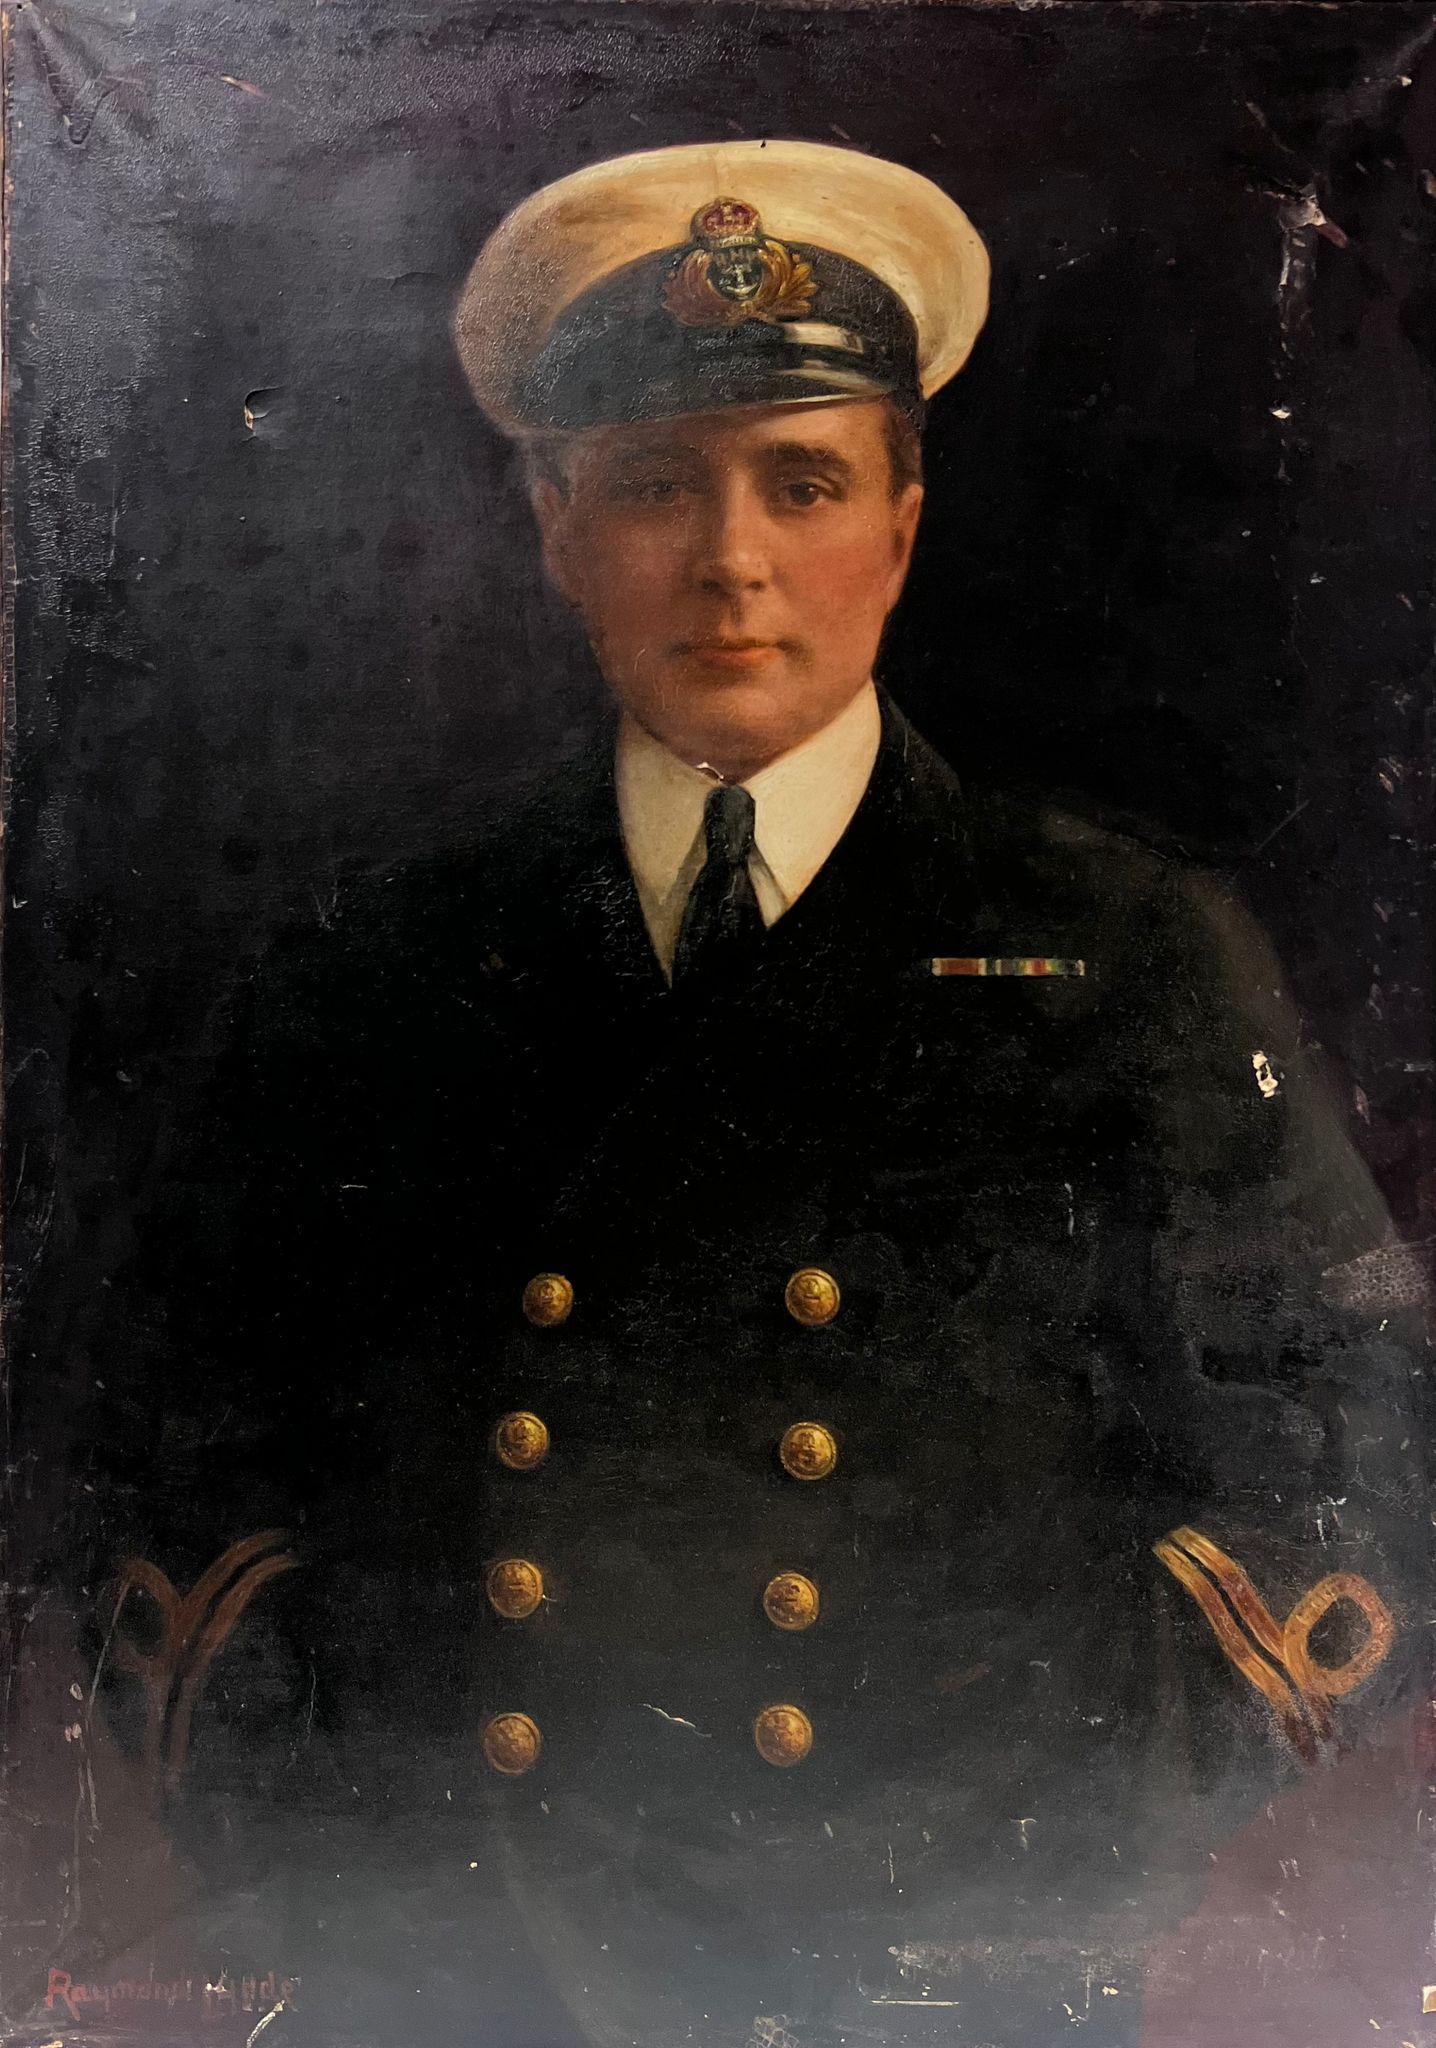 The Naval Officer
English School, early 20th century
oil on canvas, unframed
canvas : 24 x 17 inches
provenance: private collection, England
condition: the painting is offered for restoration as it has several scuffs, marks of damage and losses. 